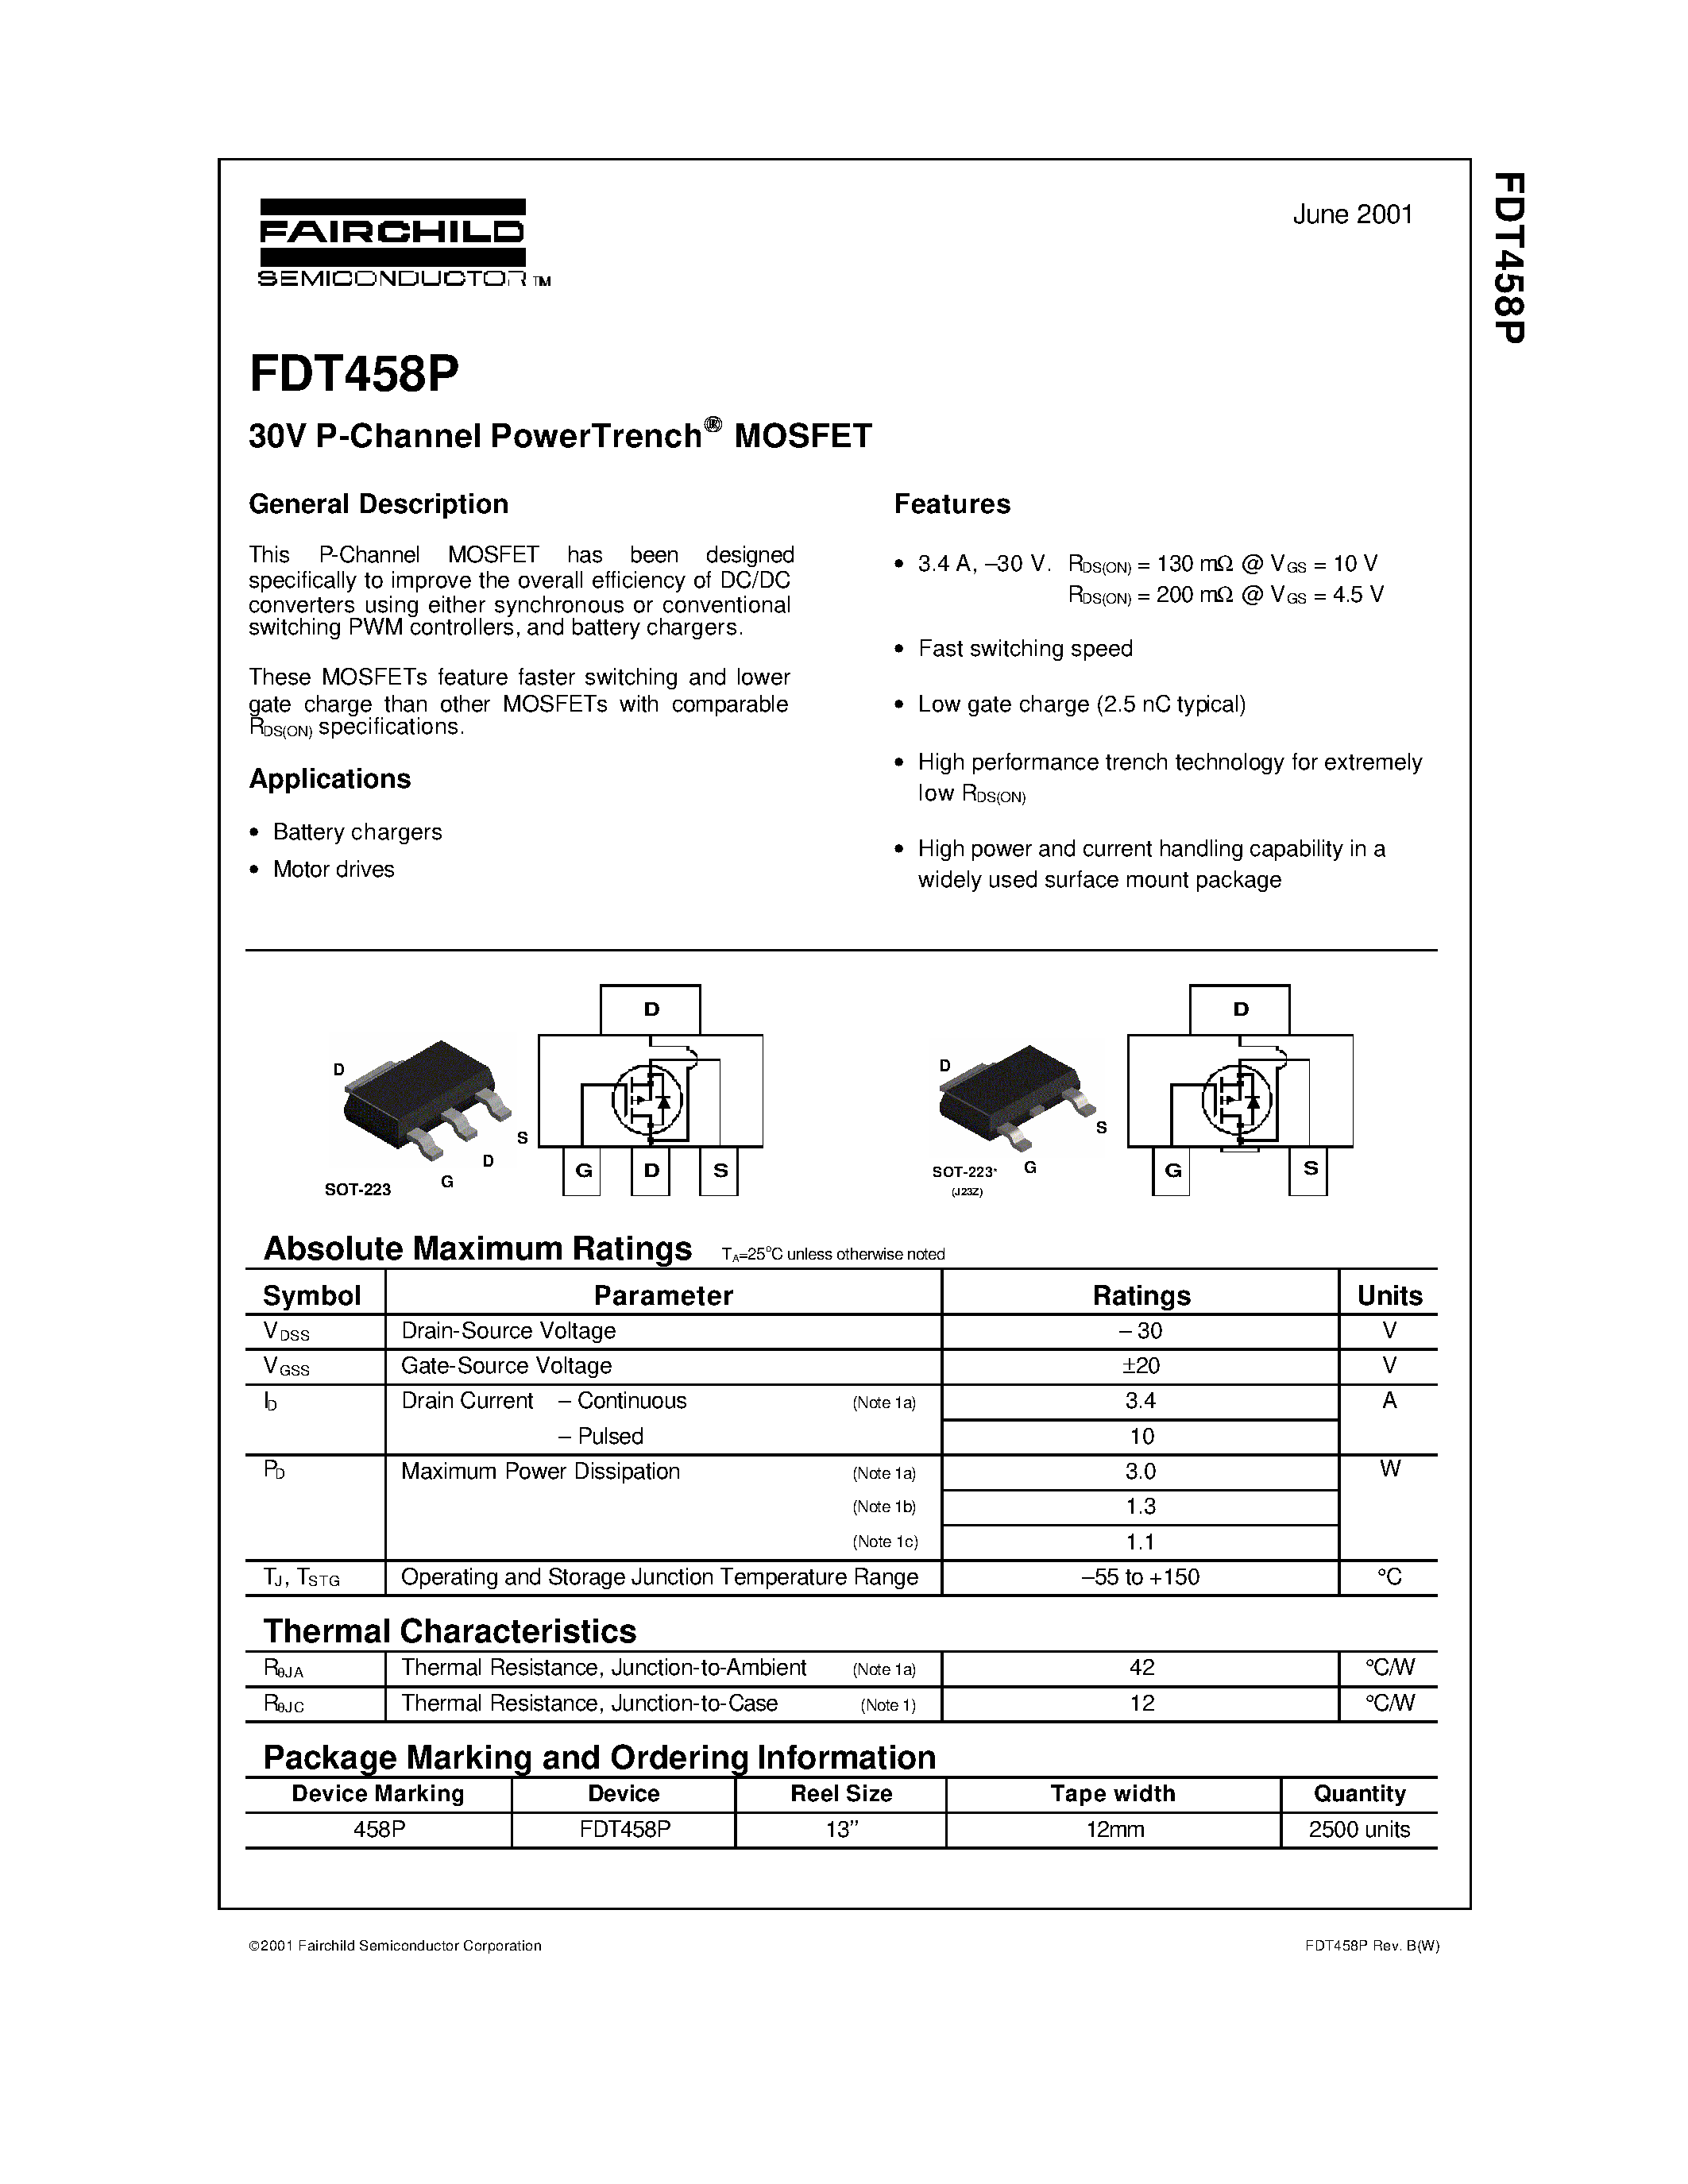 Datasheet FDT458P - 30V P-Channel PowerTrench MOSFET page 1